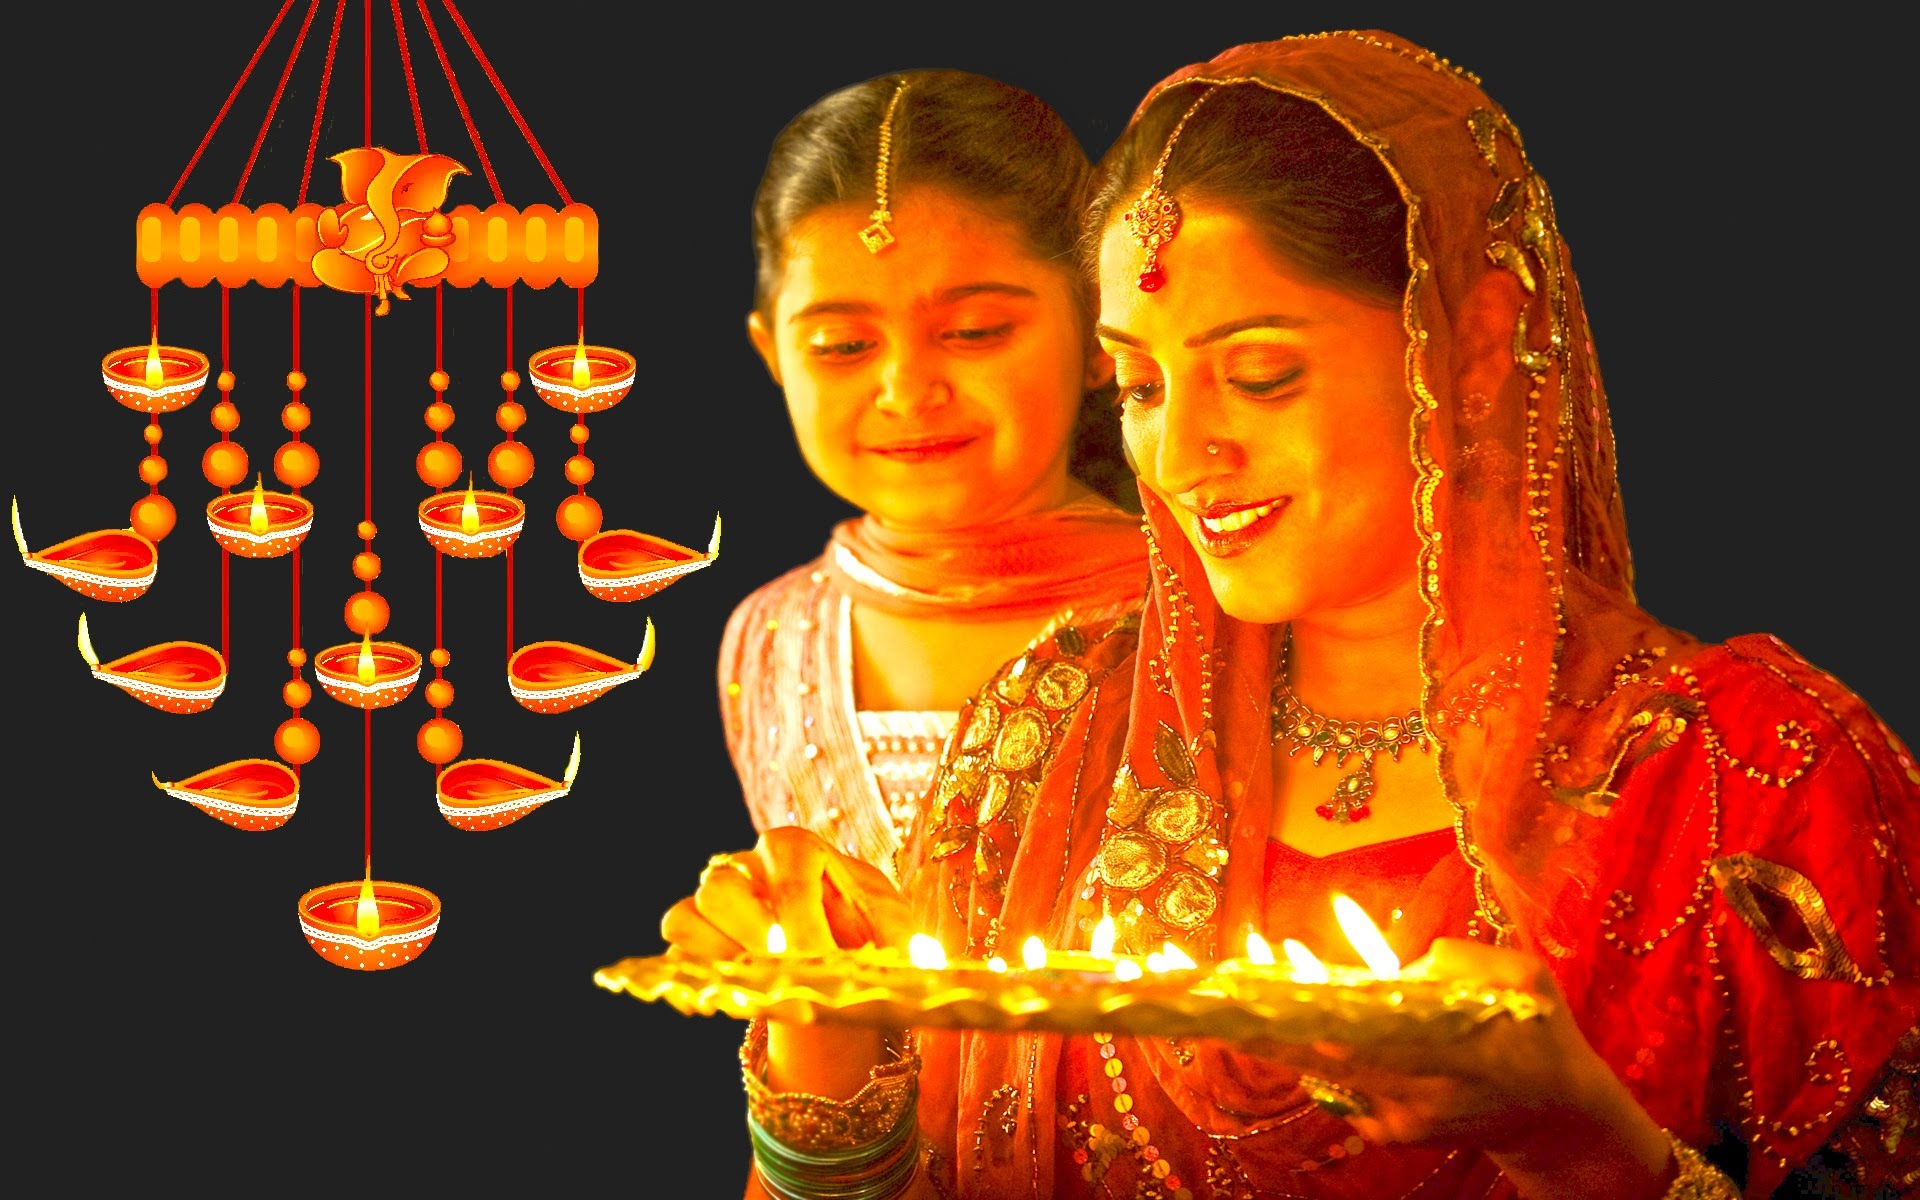 Happy Diwali Celebration Indian Woman Culture And Tradition Greeting